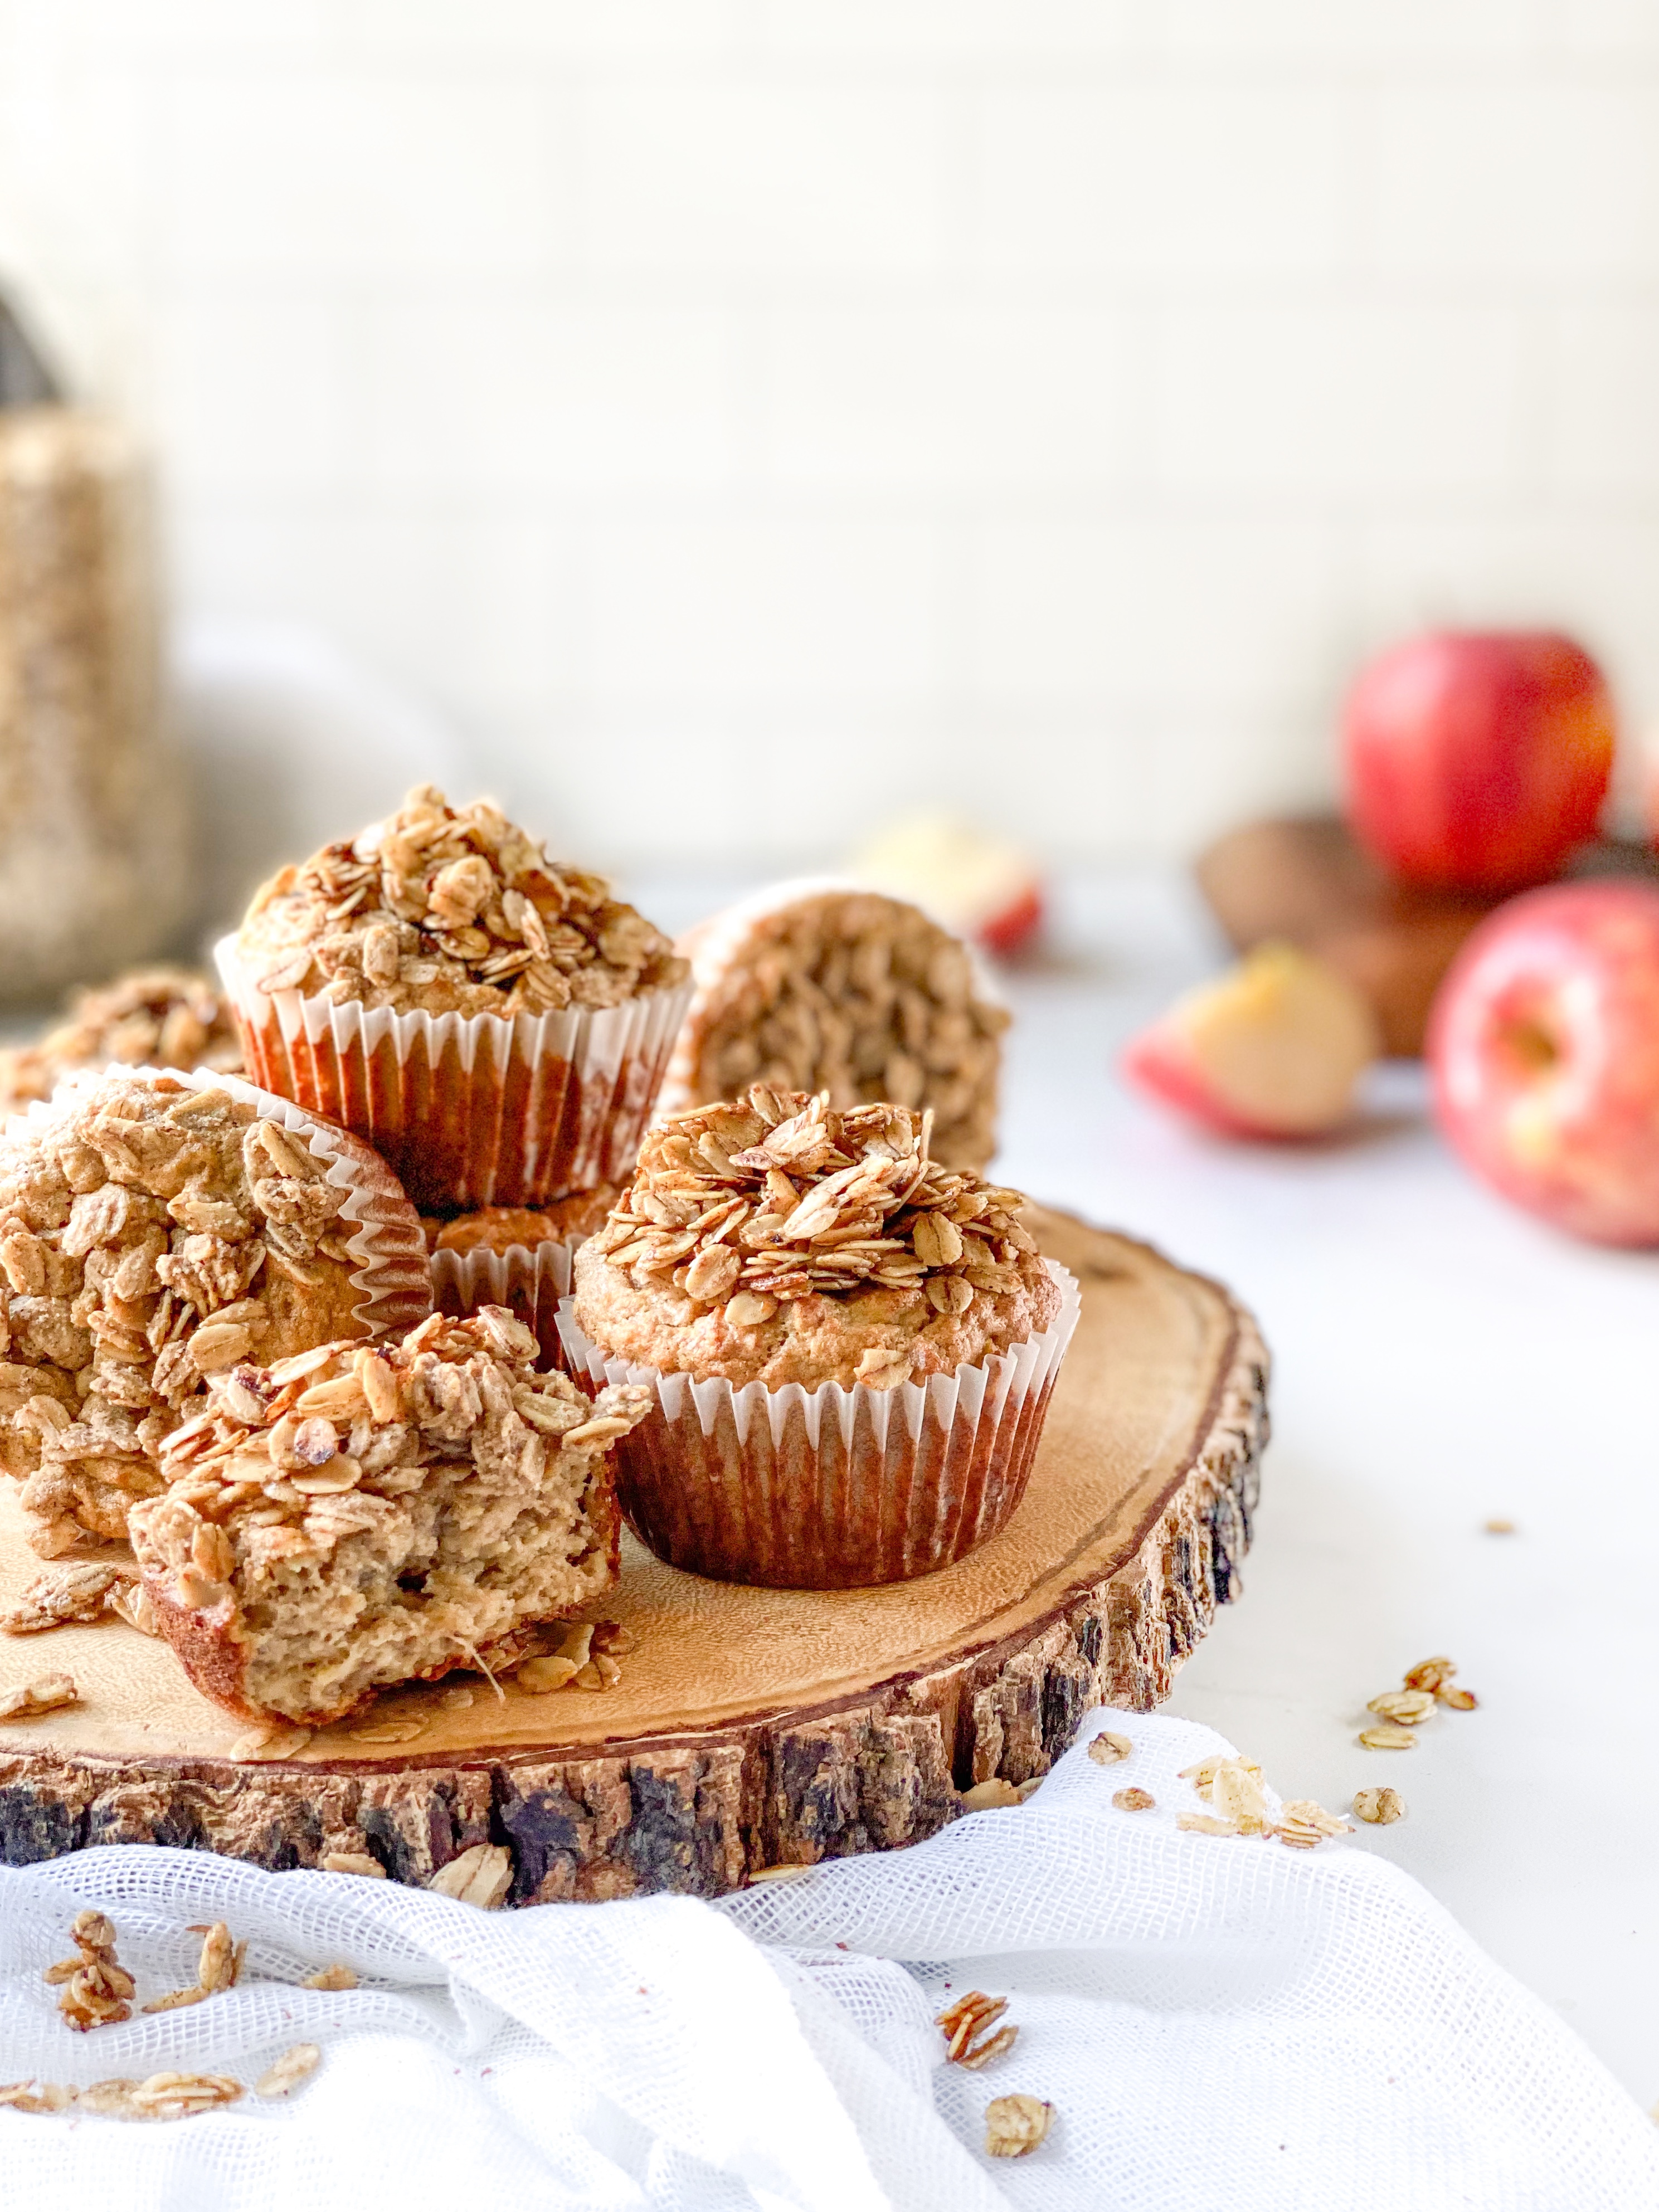 Baby friendly apple and banana muffins